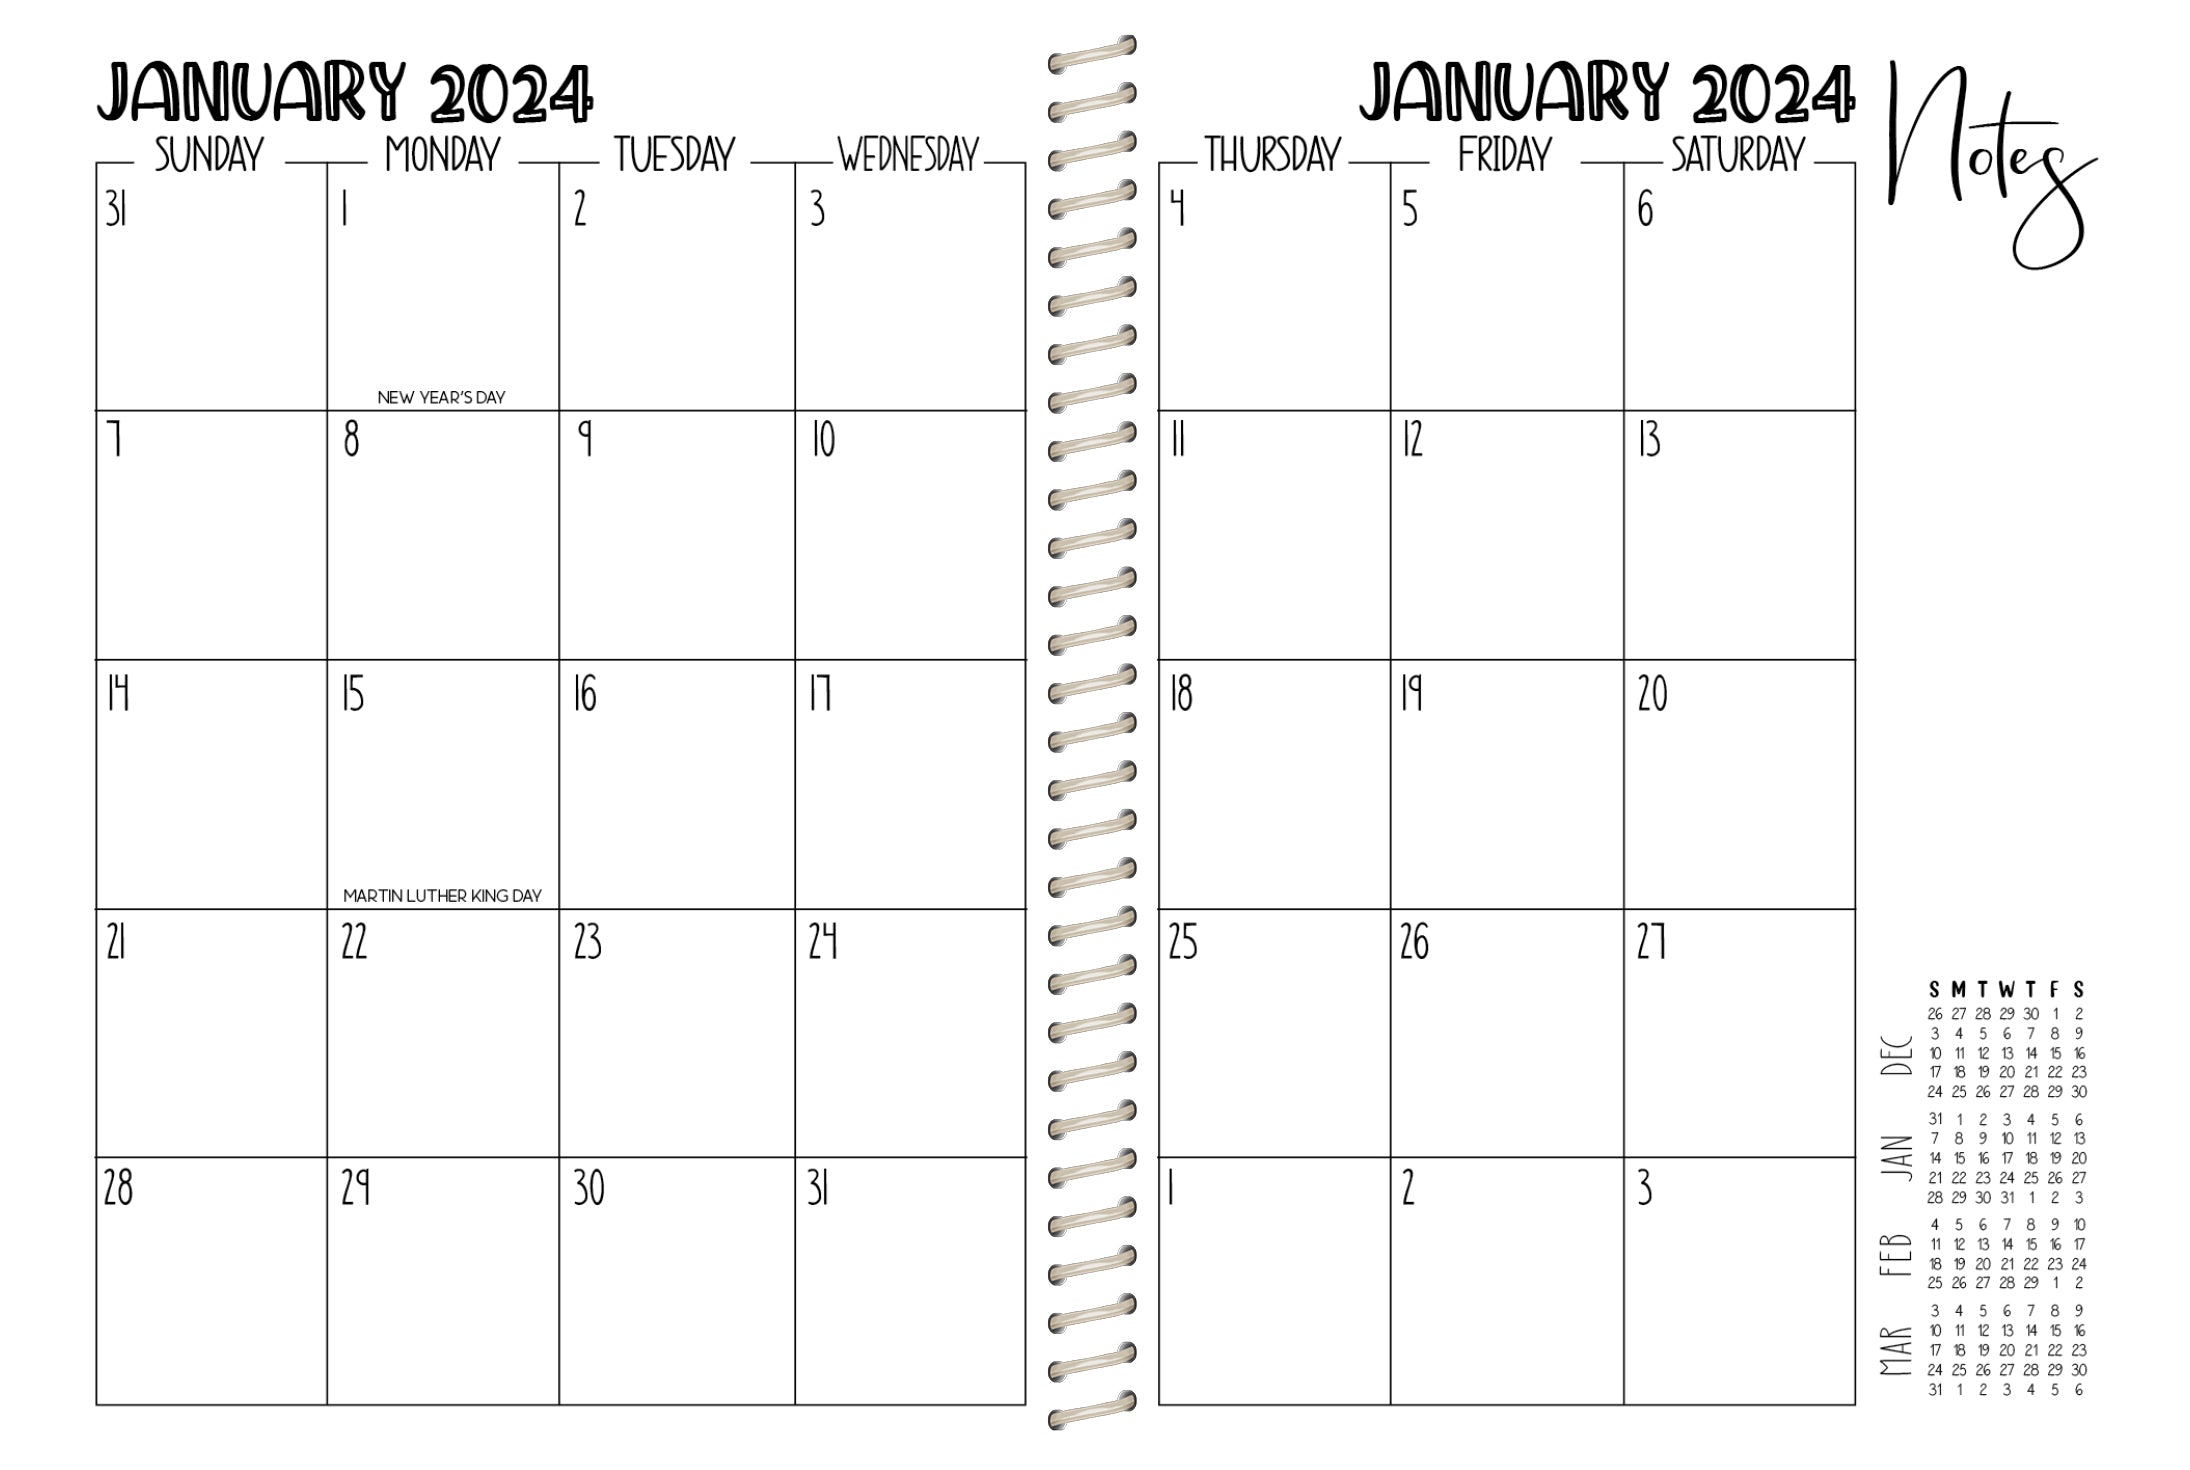 2024 Printed Weekly Planner - ROSE GOLD LEOPARD